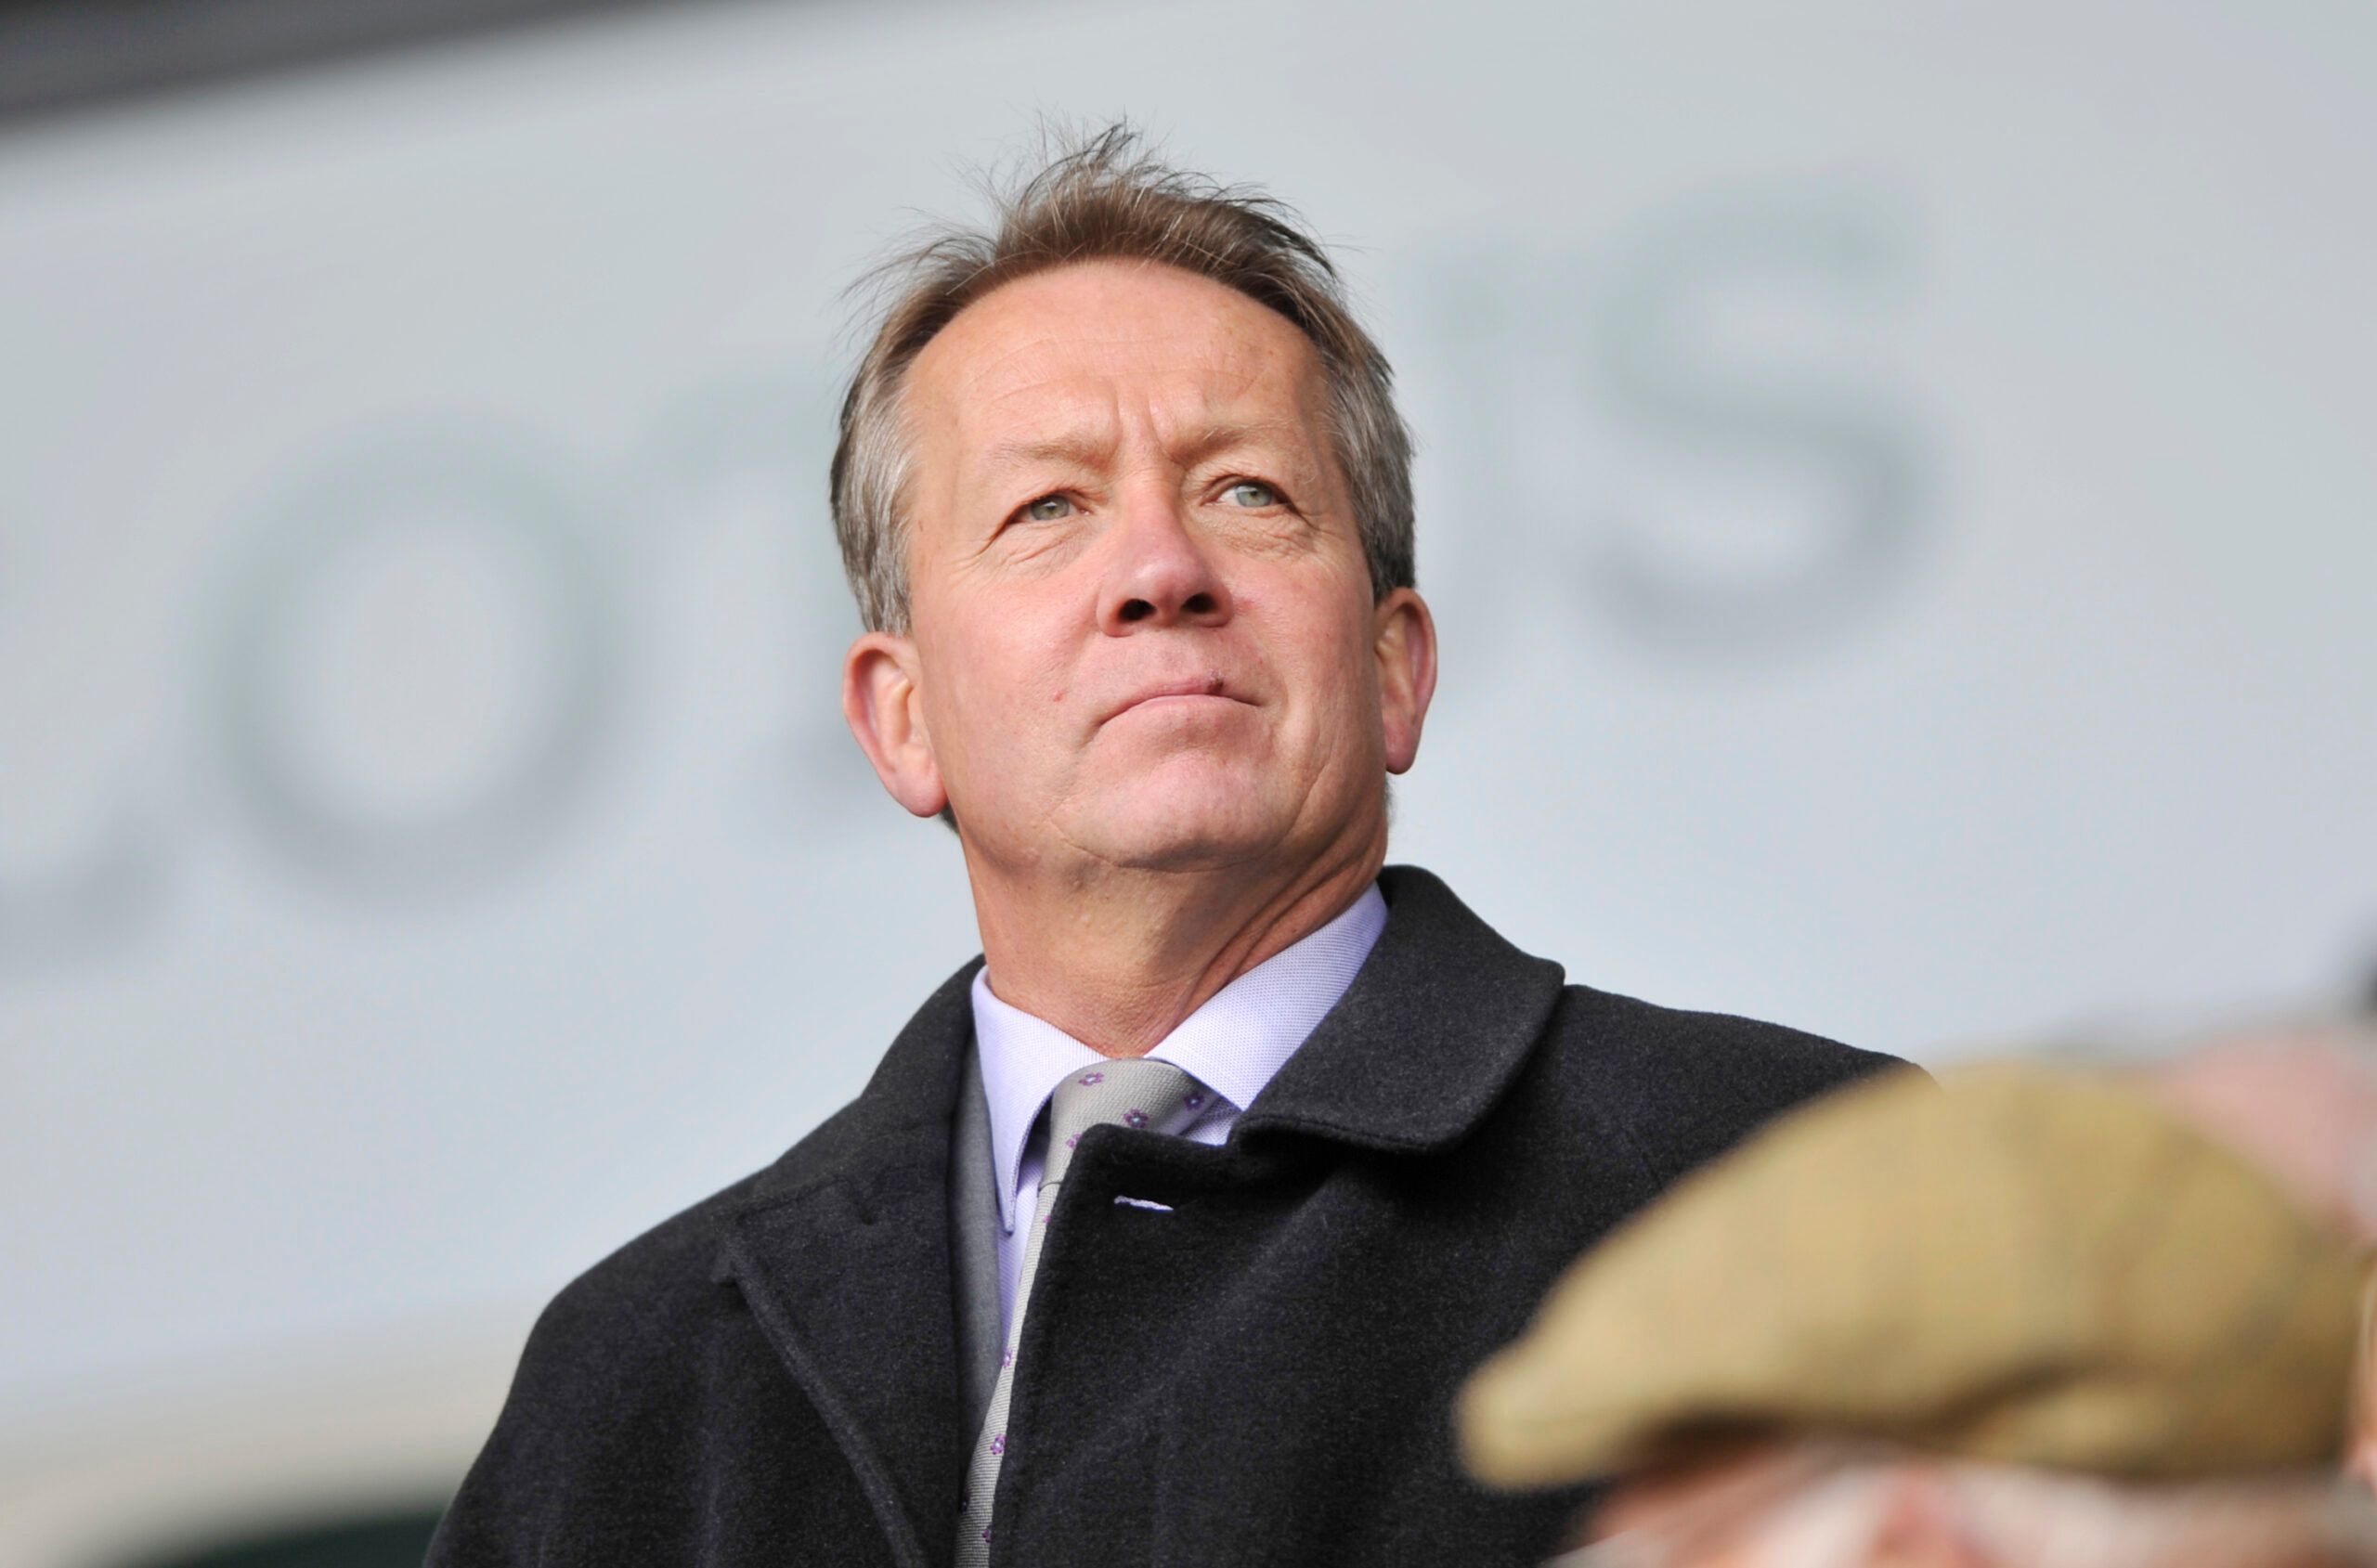 Football - Norwich City v Fulham - Sky Bet Football League Championship - Carrow Road - 2/5/15 
Fulham coach Alan Curbishley in the stands 
Mandatory Credit: Action Images / Adam Holt 
Livepic 
EDITORIAL USE ONLY. No use with unauthorized audio, video, data, fixture lists, club/league logos or 